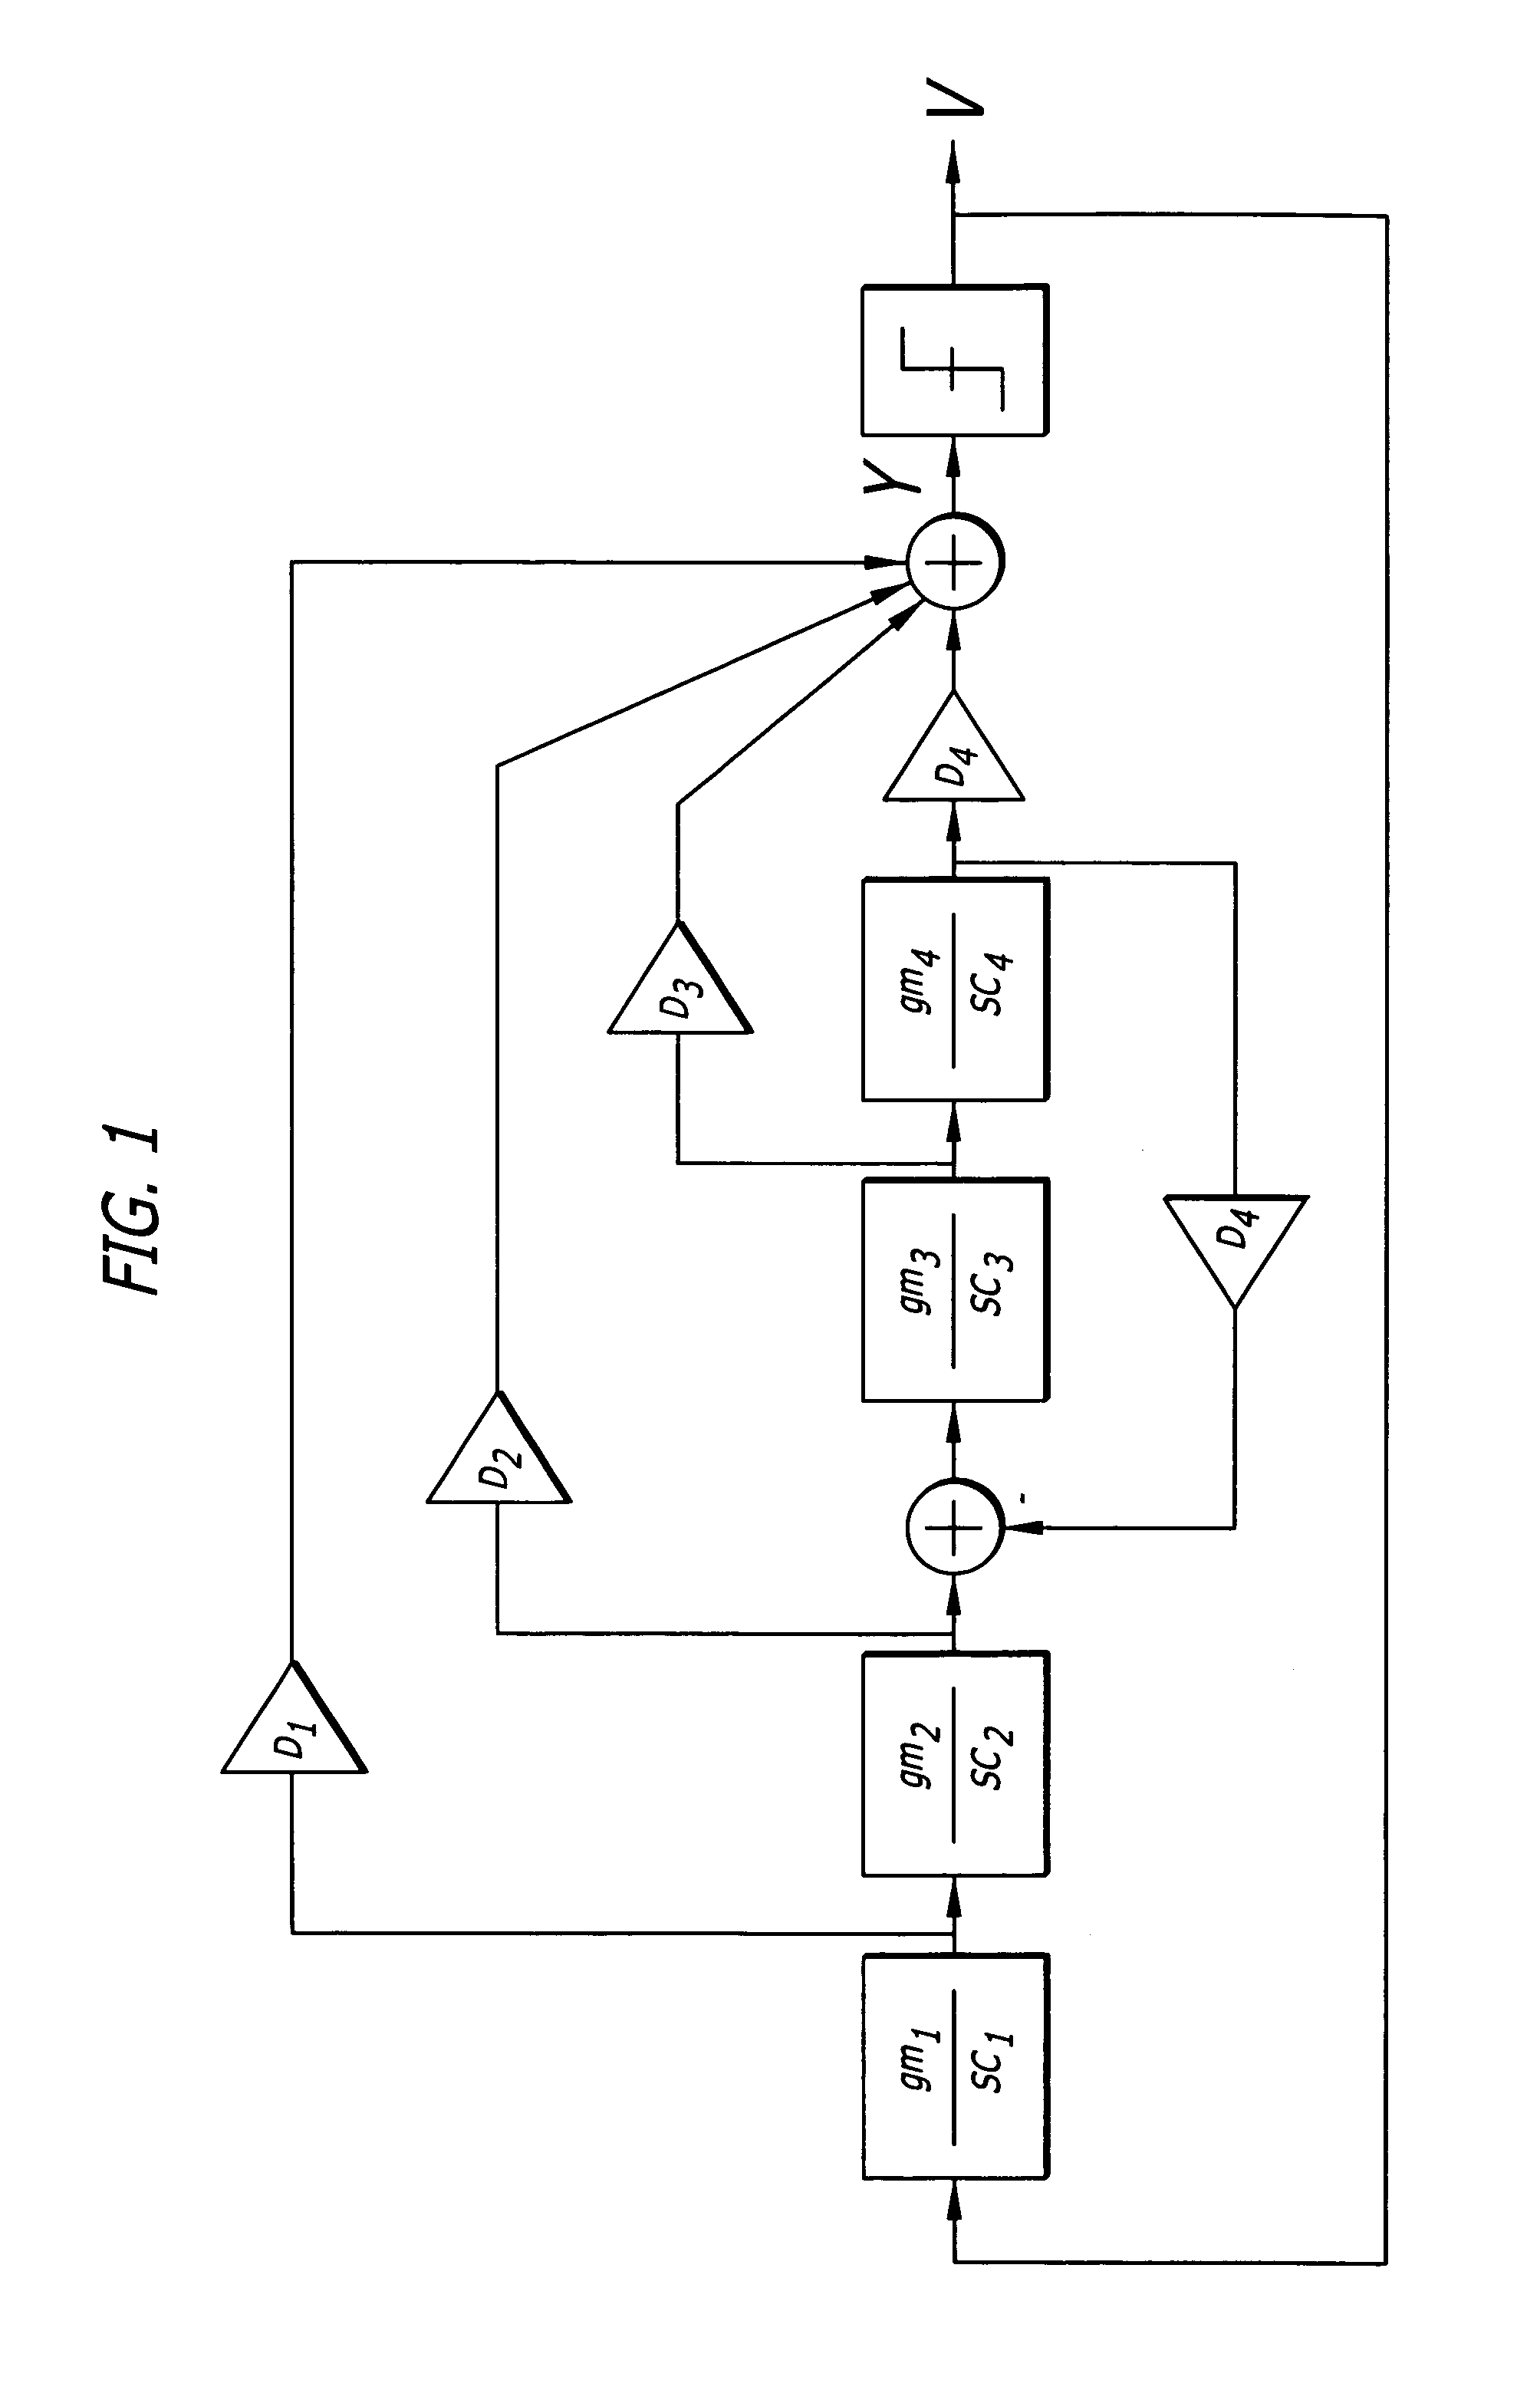 Process variation trim/tuning for continuous time filters and Delta-Sigma analog to digital converters